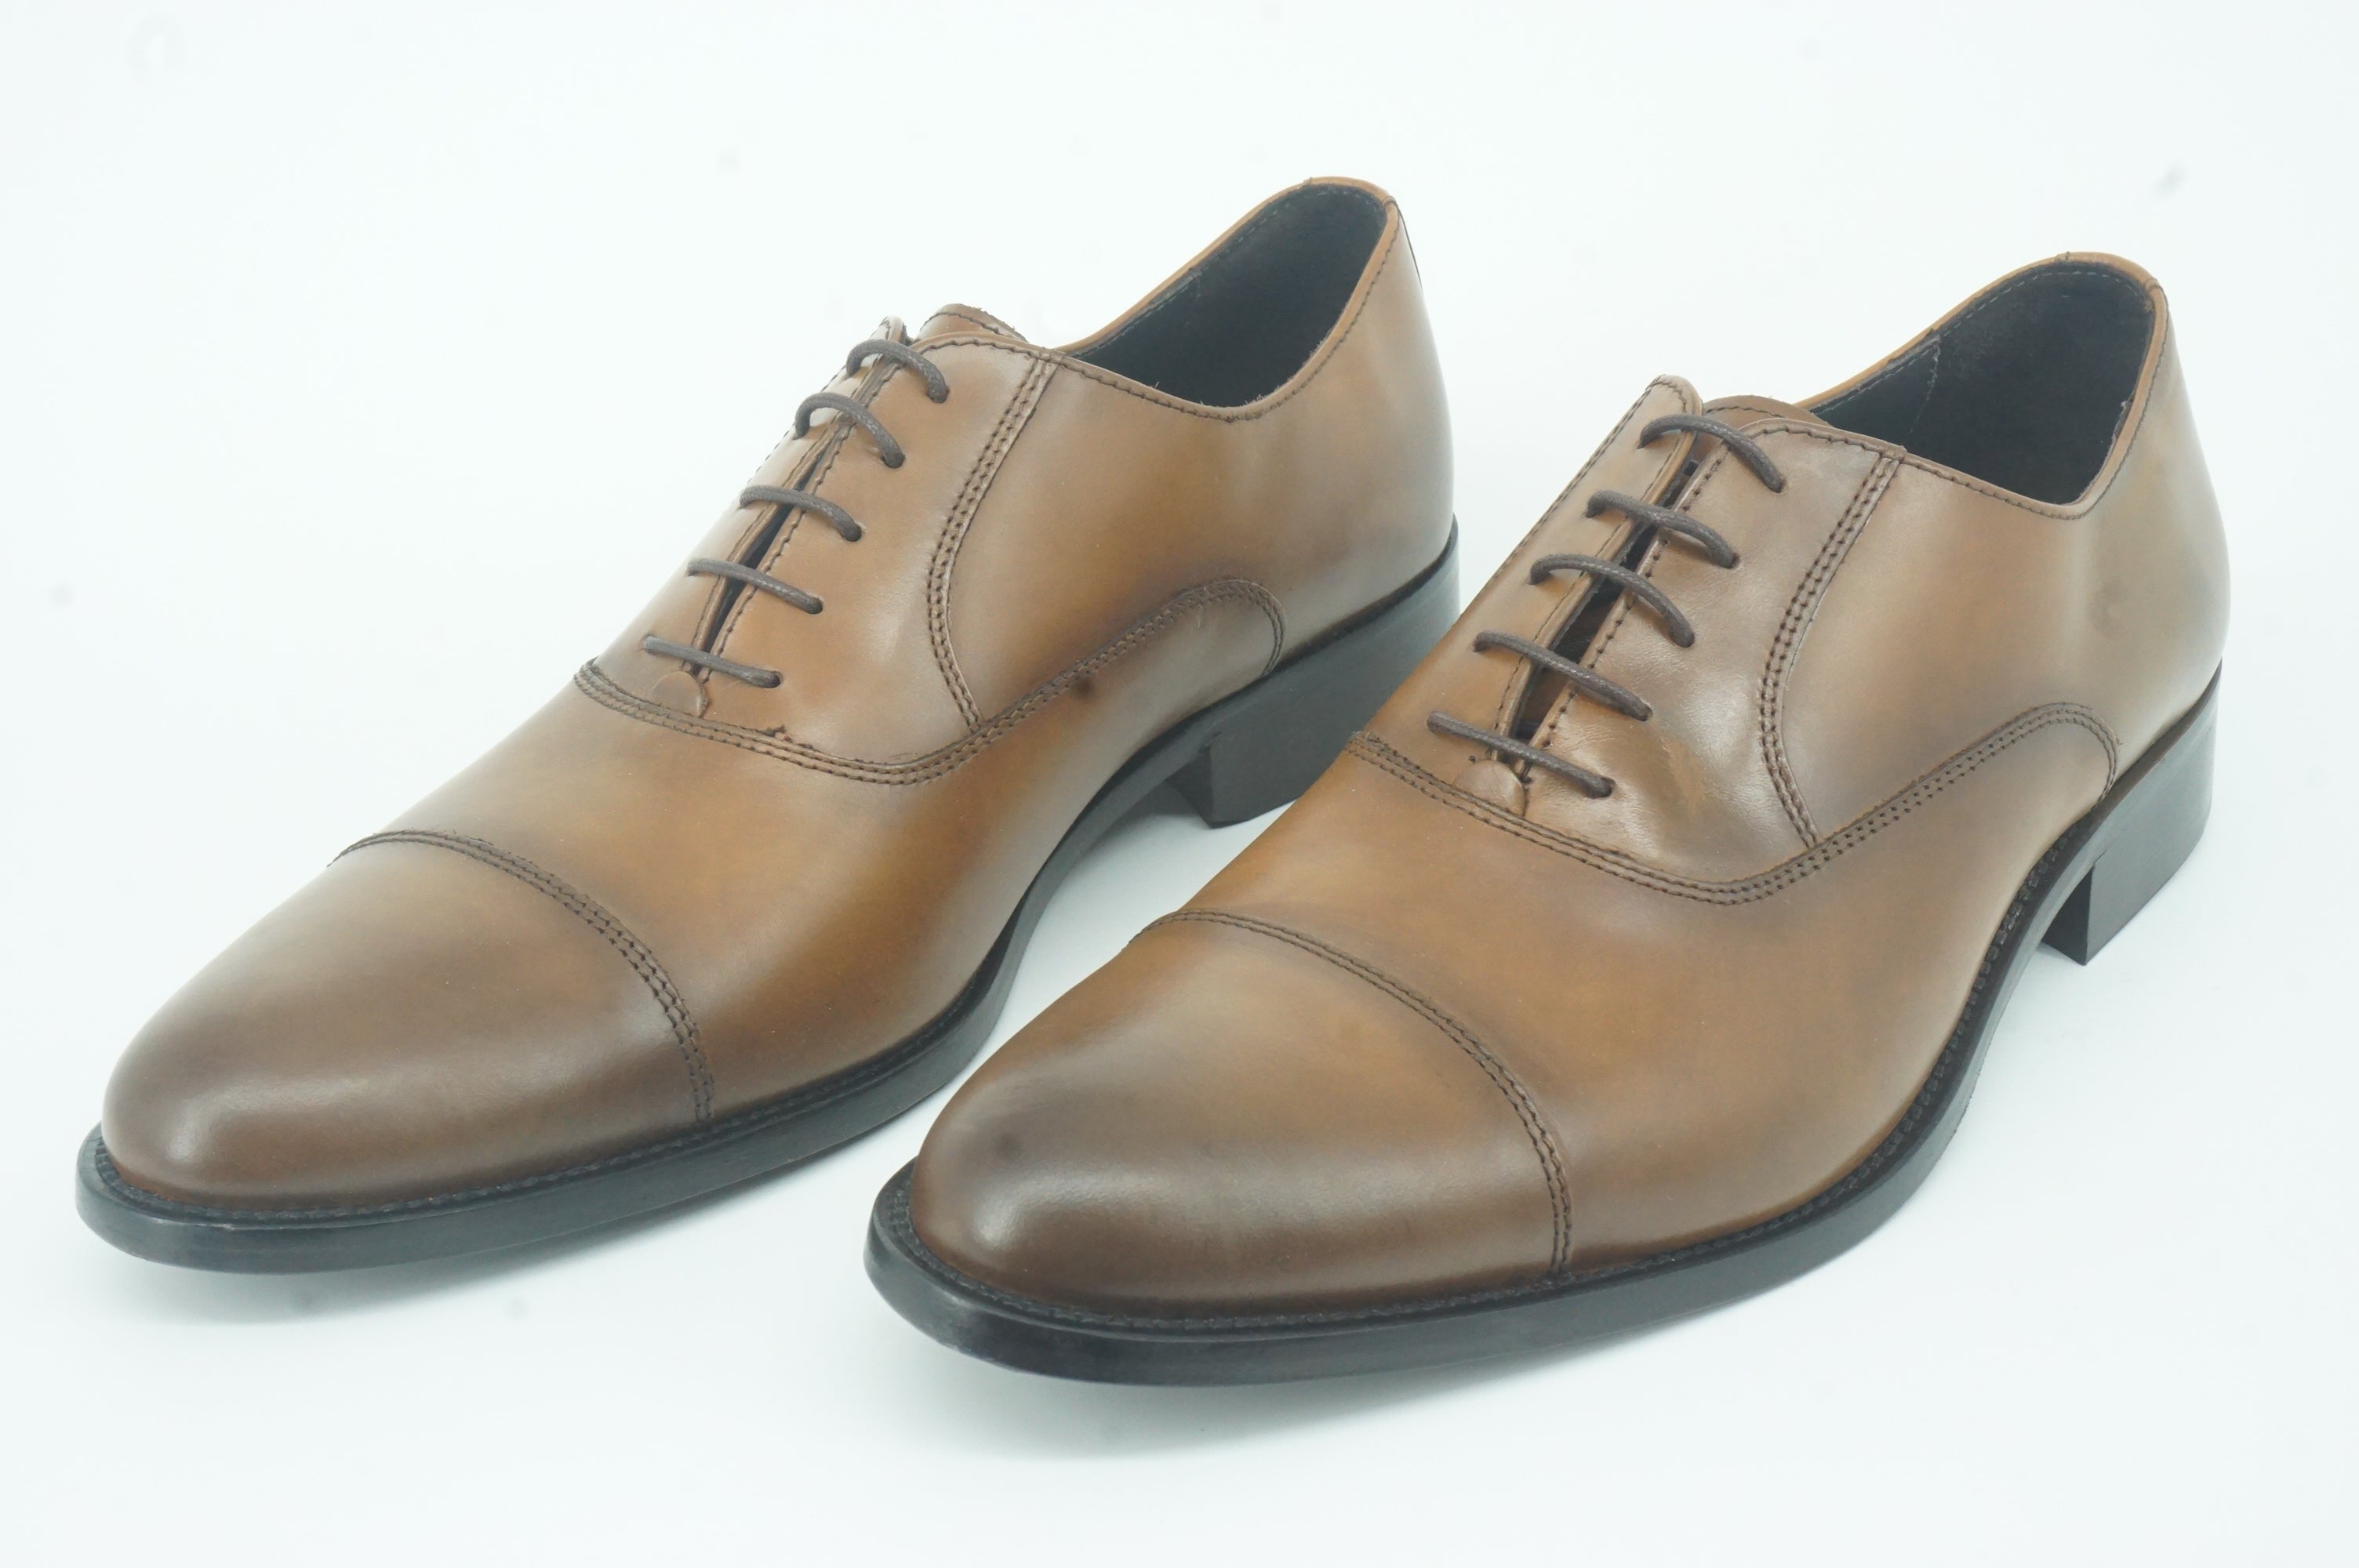 To Boot New York Caufield Men's Brown Leather Cap Toe Oxfords Size 13 D $395